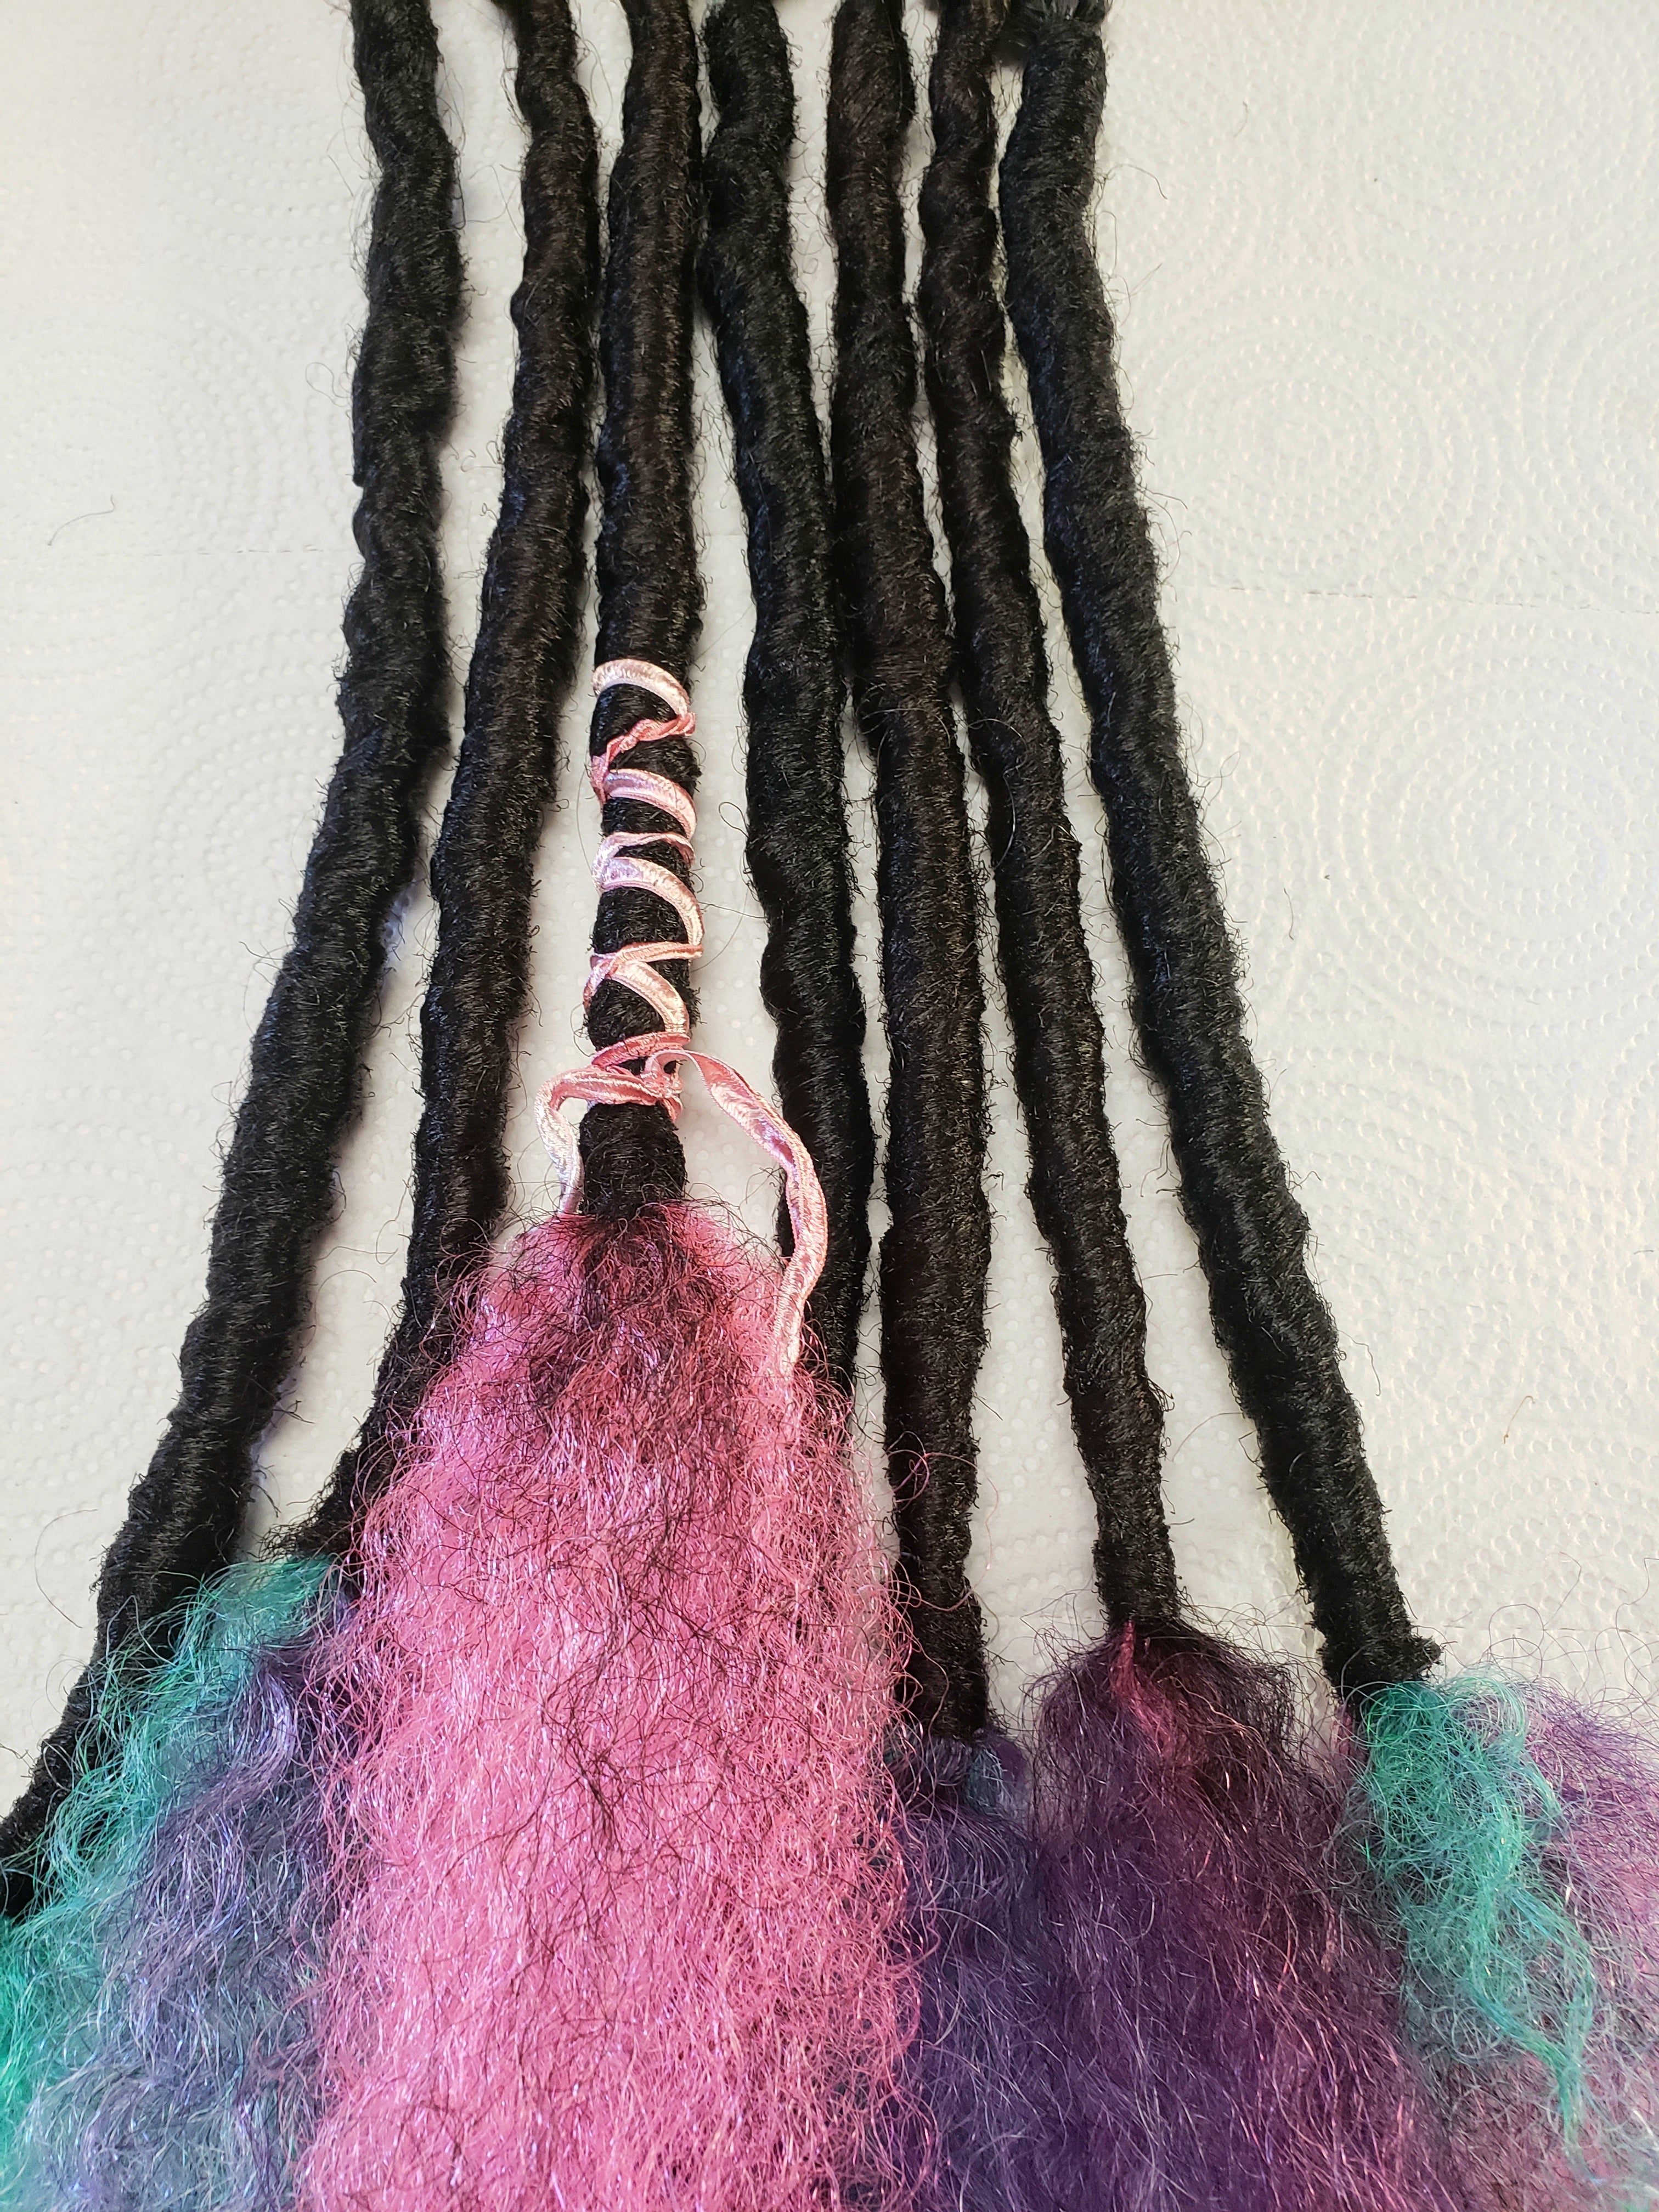 Synthetic Dreadlock set of 5 "Unicorn Tails" Marley Deads Hair